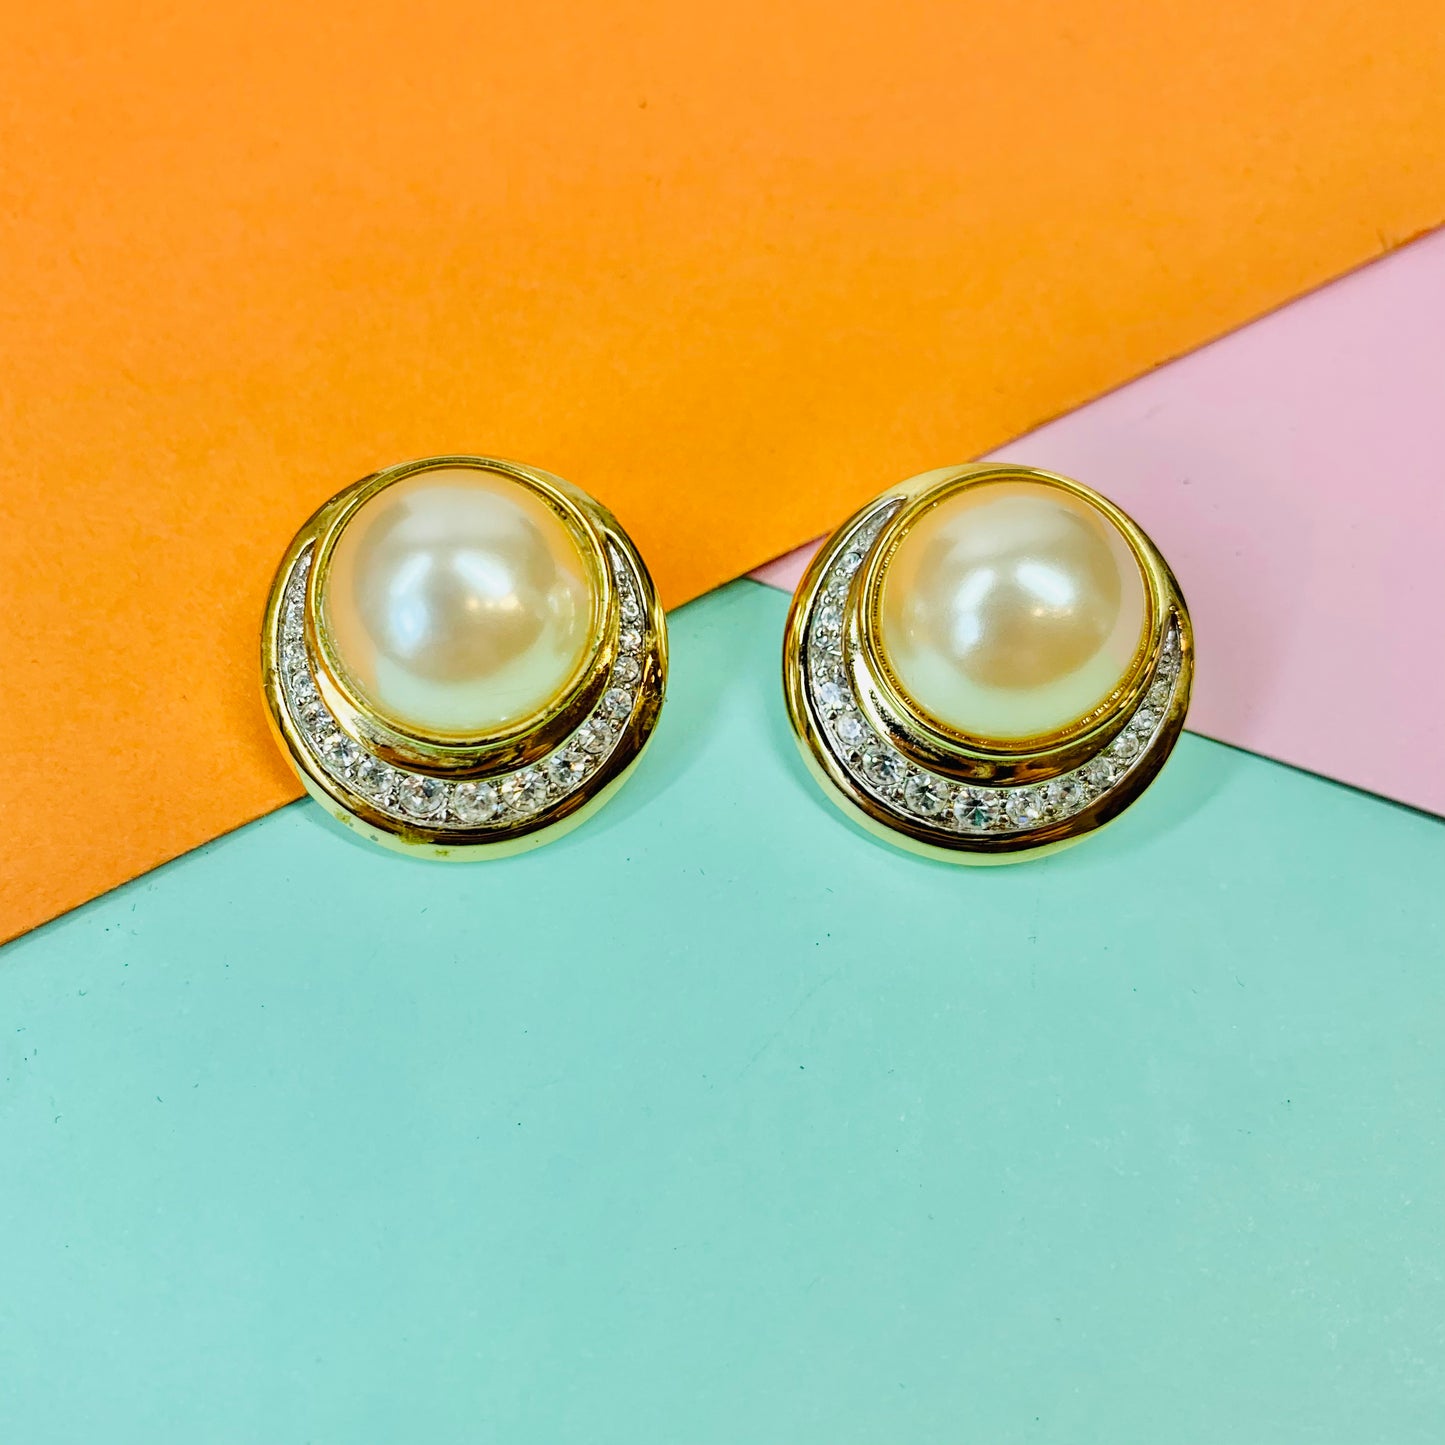 Vintage Oroton pearl gold brooch and matching earrings